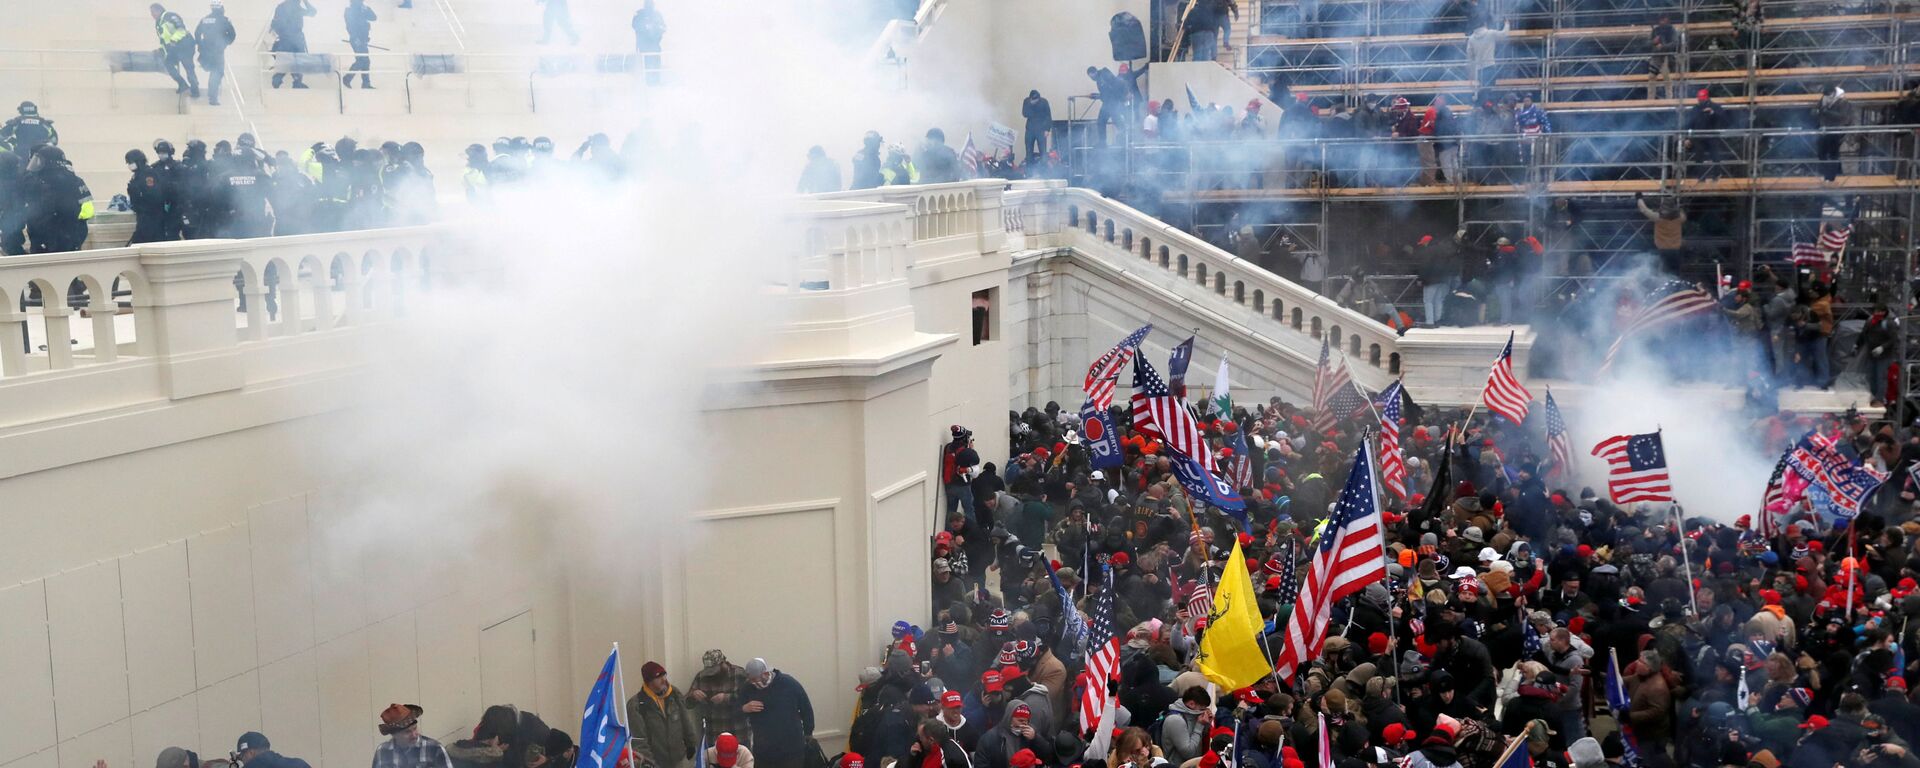 A mob of supporters of former U.S. President Donald Trump fight with members of law enforcement at a door they broke open as they storm the U.S. Capitol Building in Washington, U.S., January 6, 2021 - Sputnik International, 1920, 17.12.2021